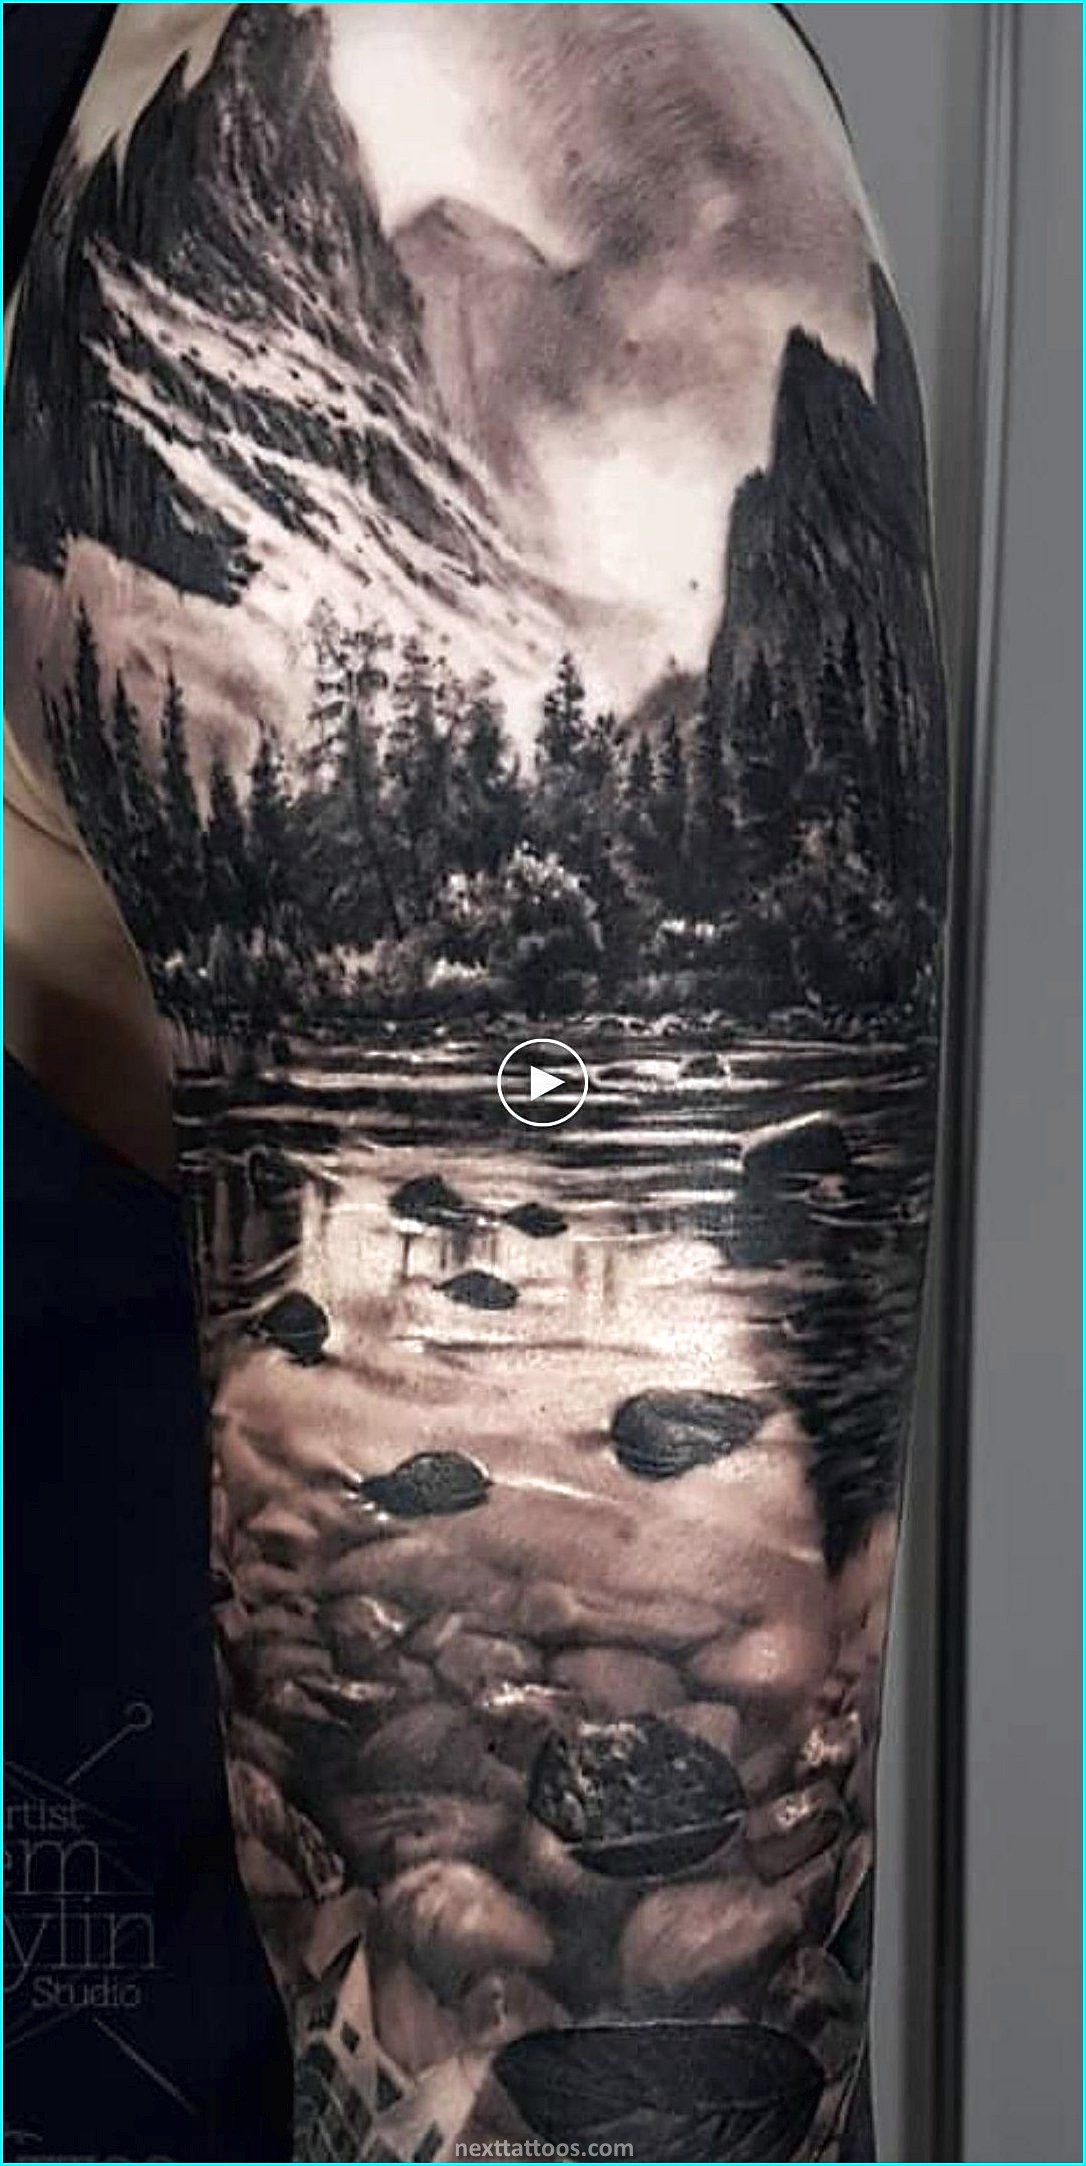 How to Bookmark Nature Tattoos Pinterest